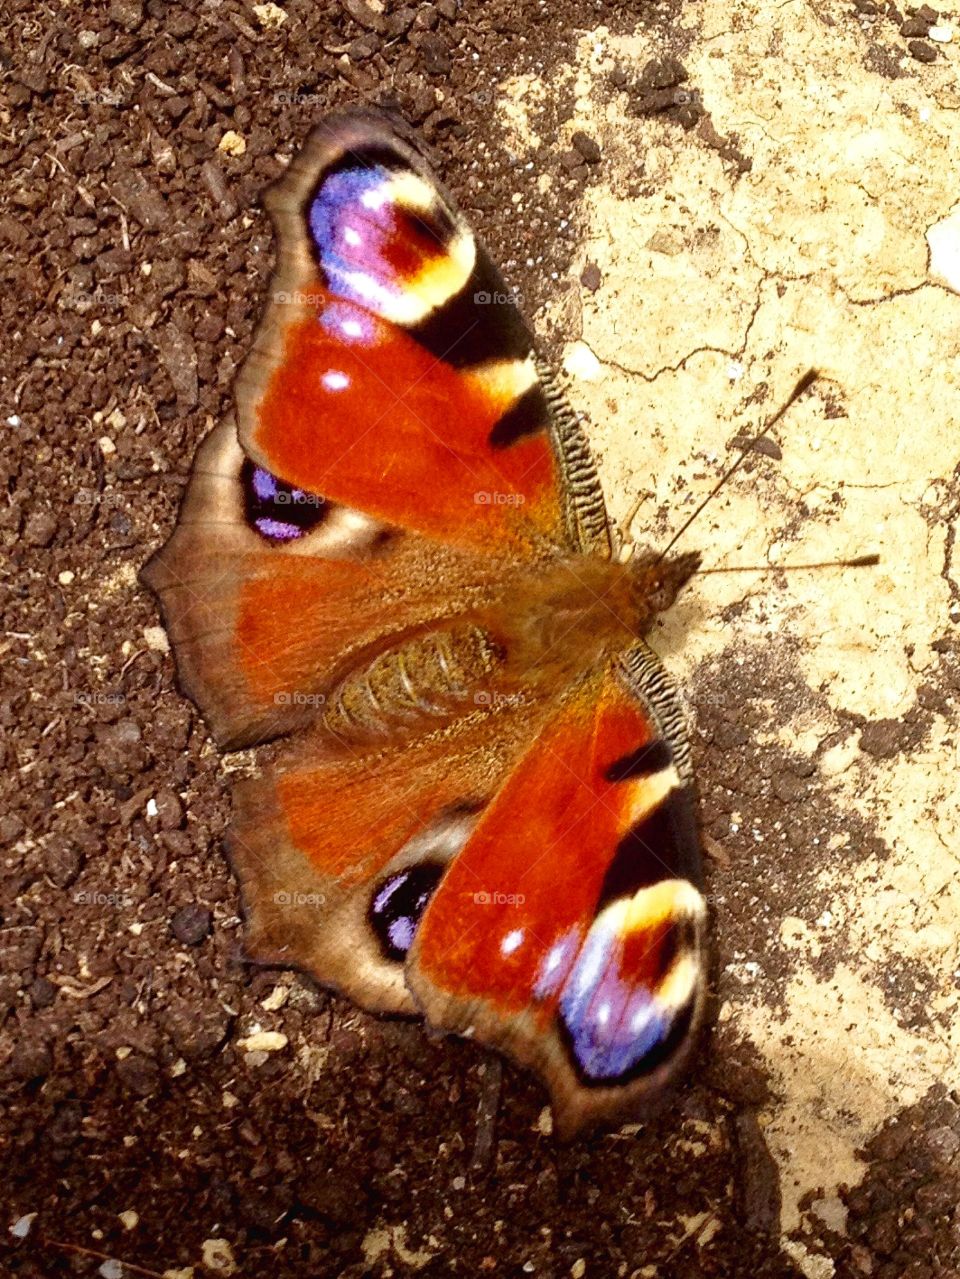 English butterfly 